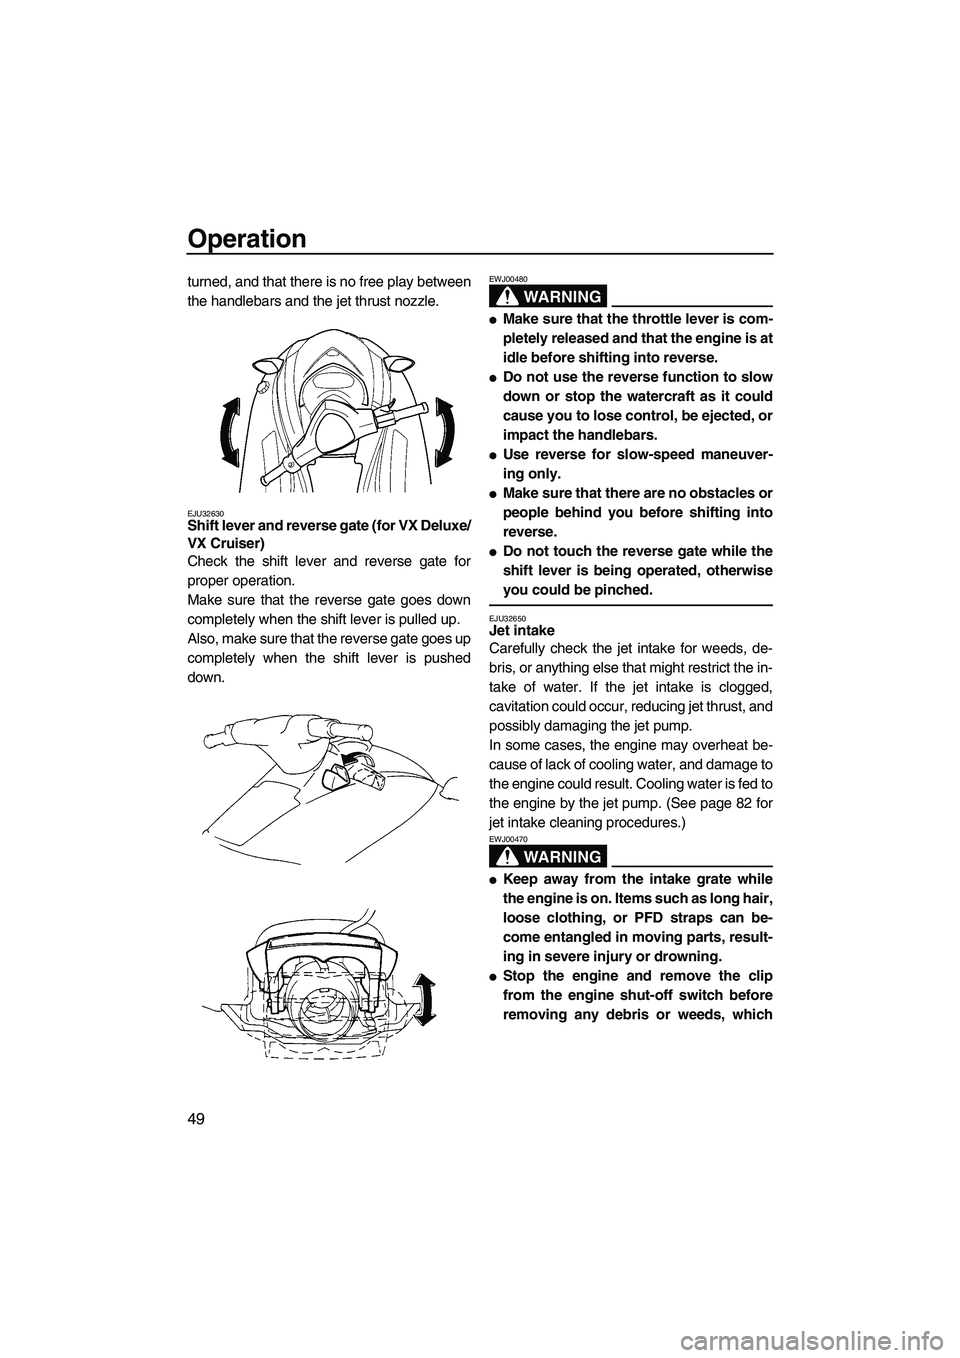 YAMAHA VX 2007  Owners Manual Operation
49
turned, and that there is no free play between
the handlebars and the jet thrust nozzle.
EJU32630Shift lever and reverse gate (for VX Deluxe/
VX Cruiser) 
Check the shift lever and revers